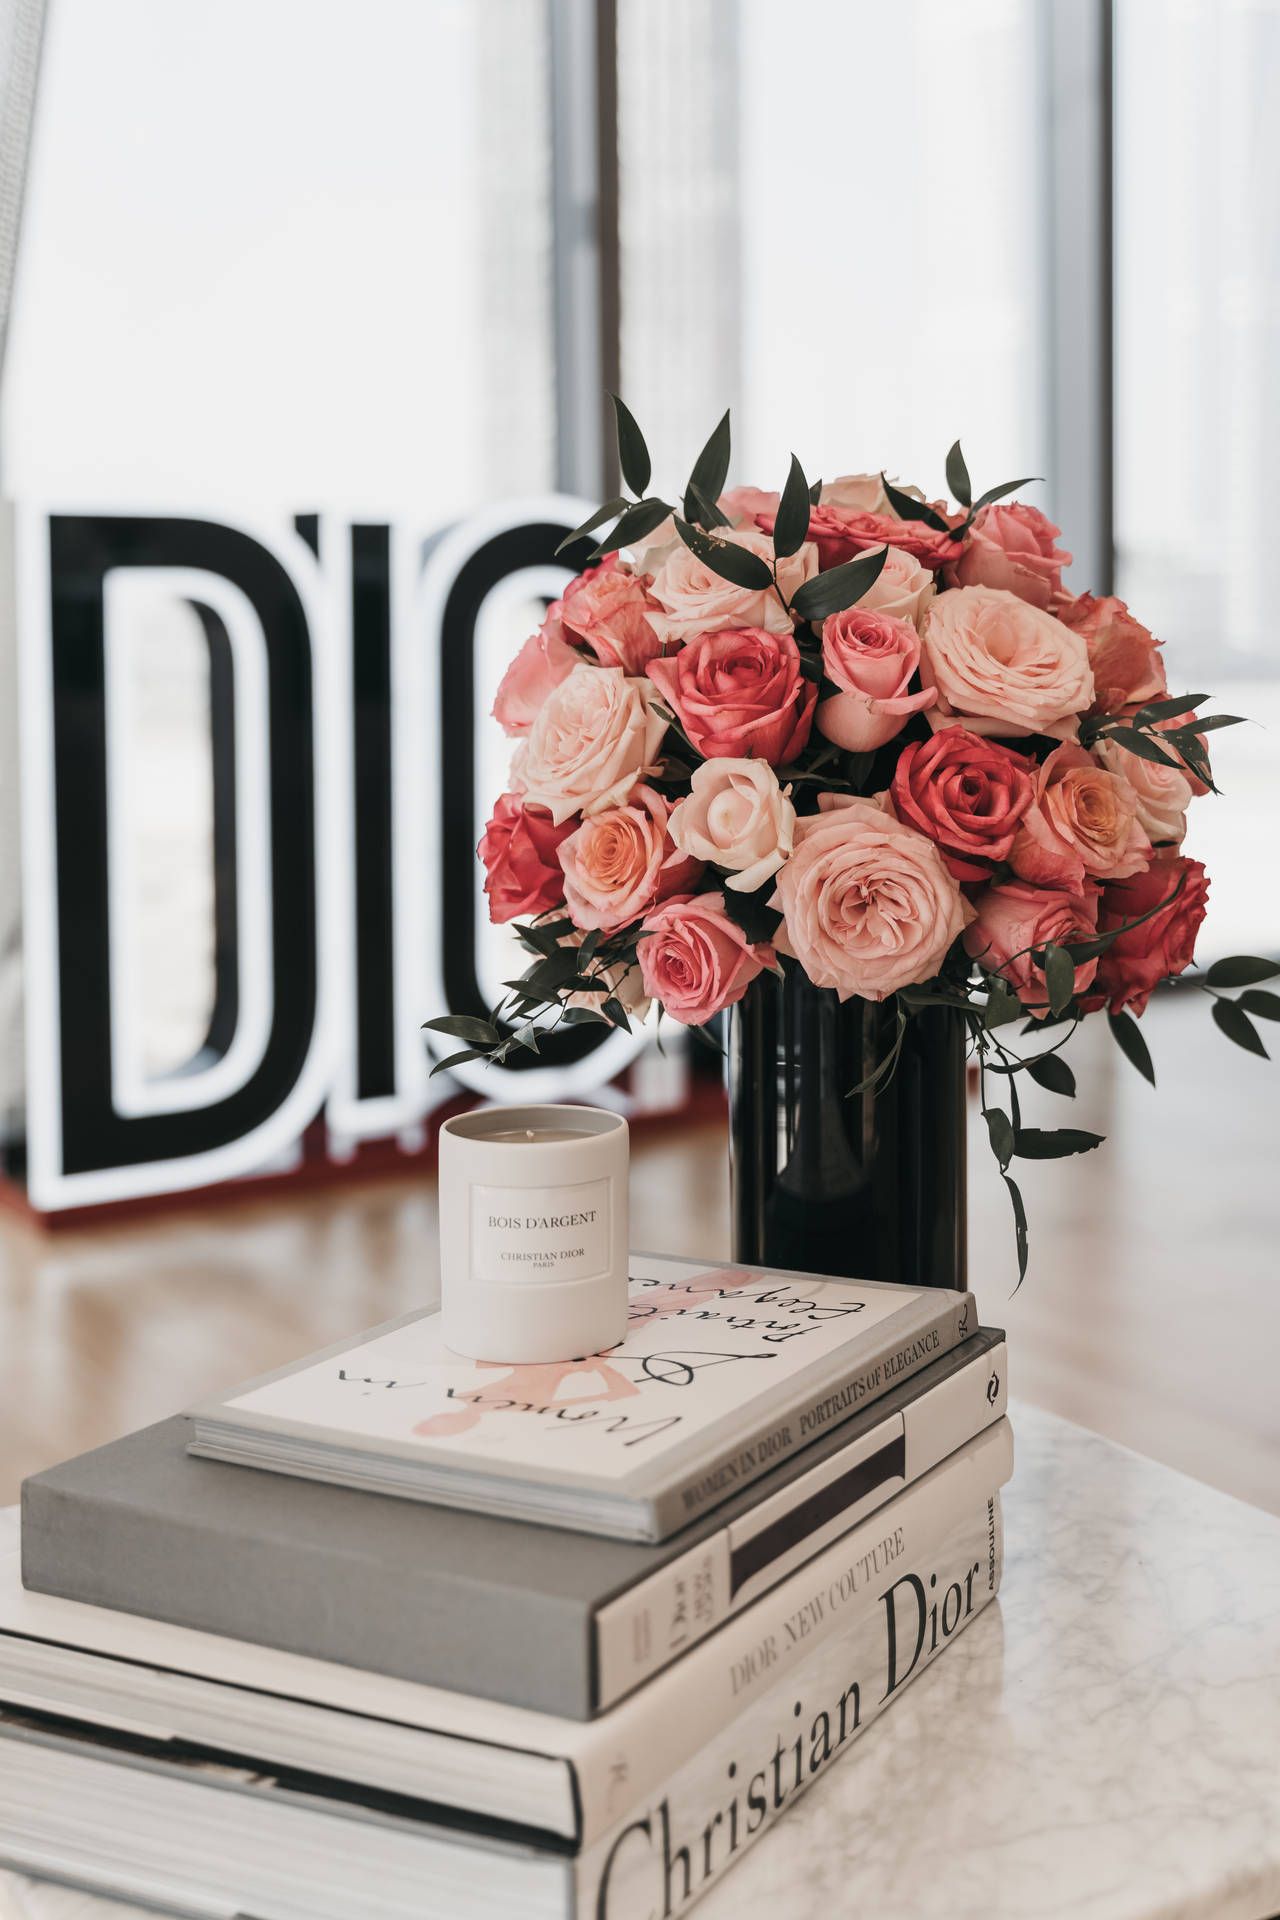 A vase of roses sits on a table with books. - Dior